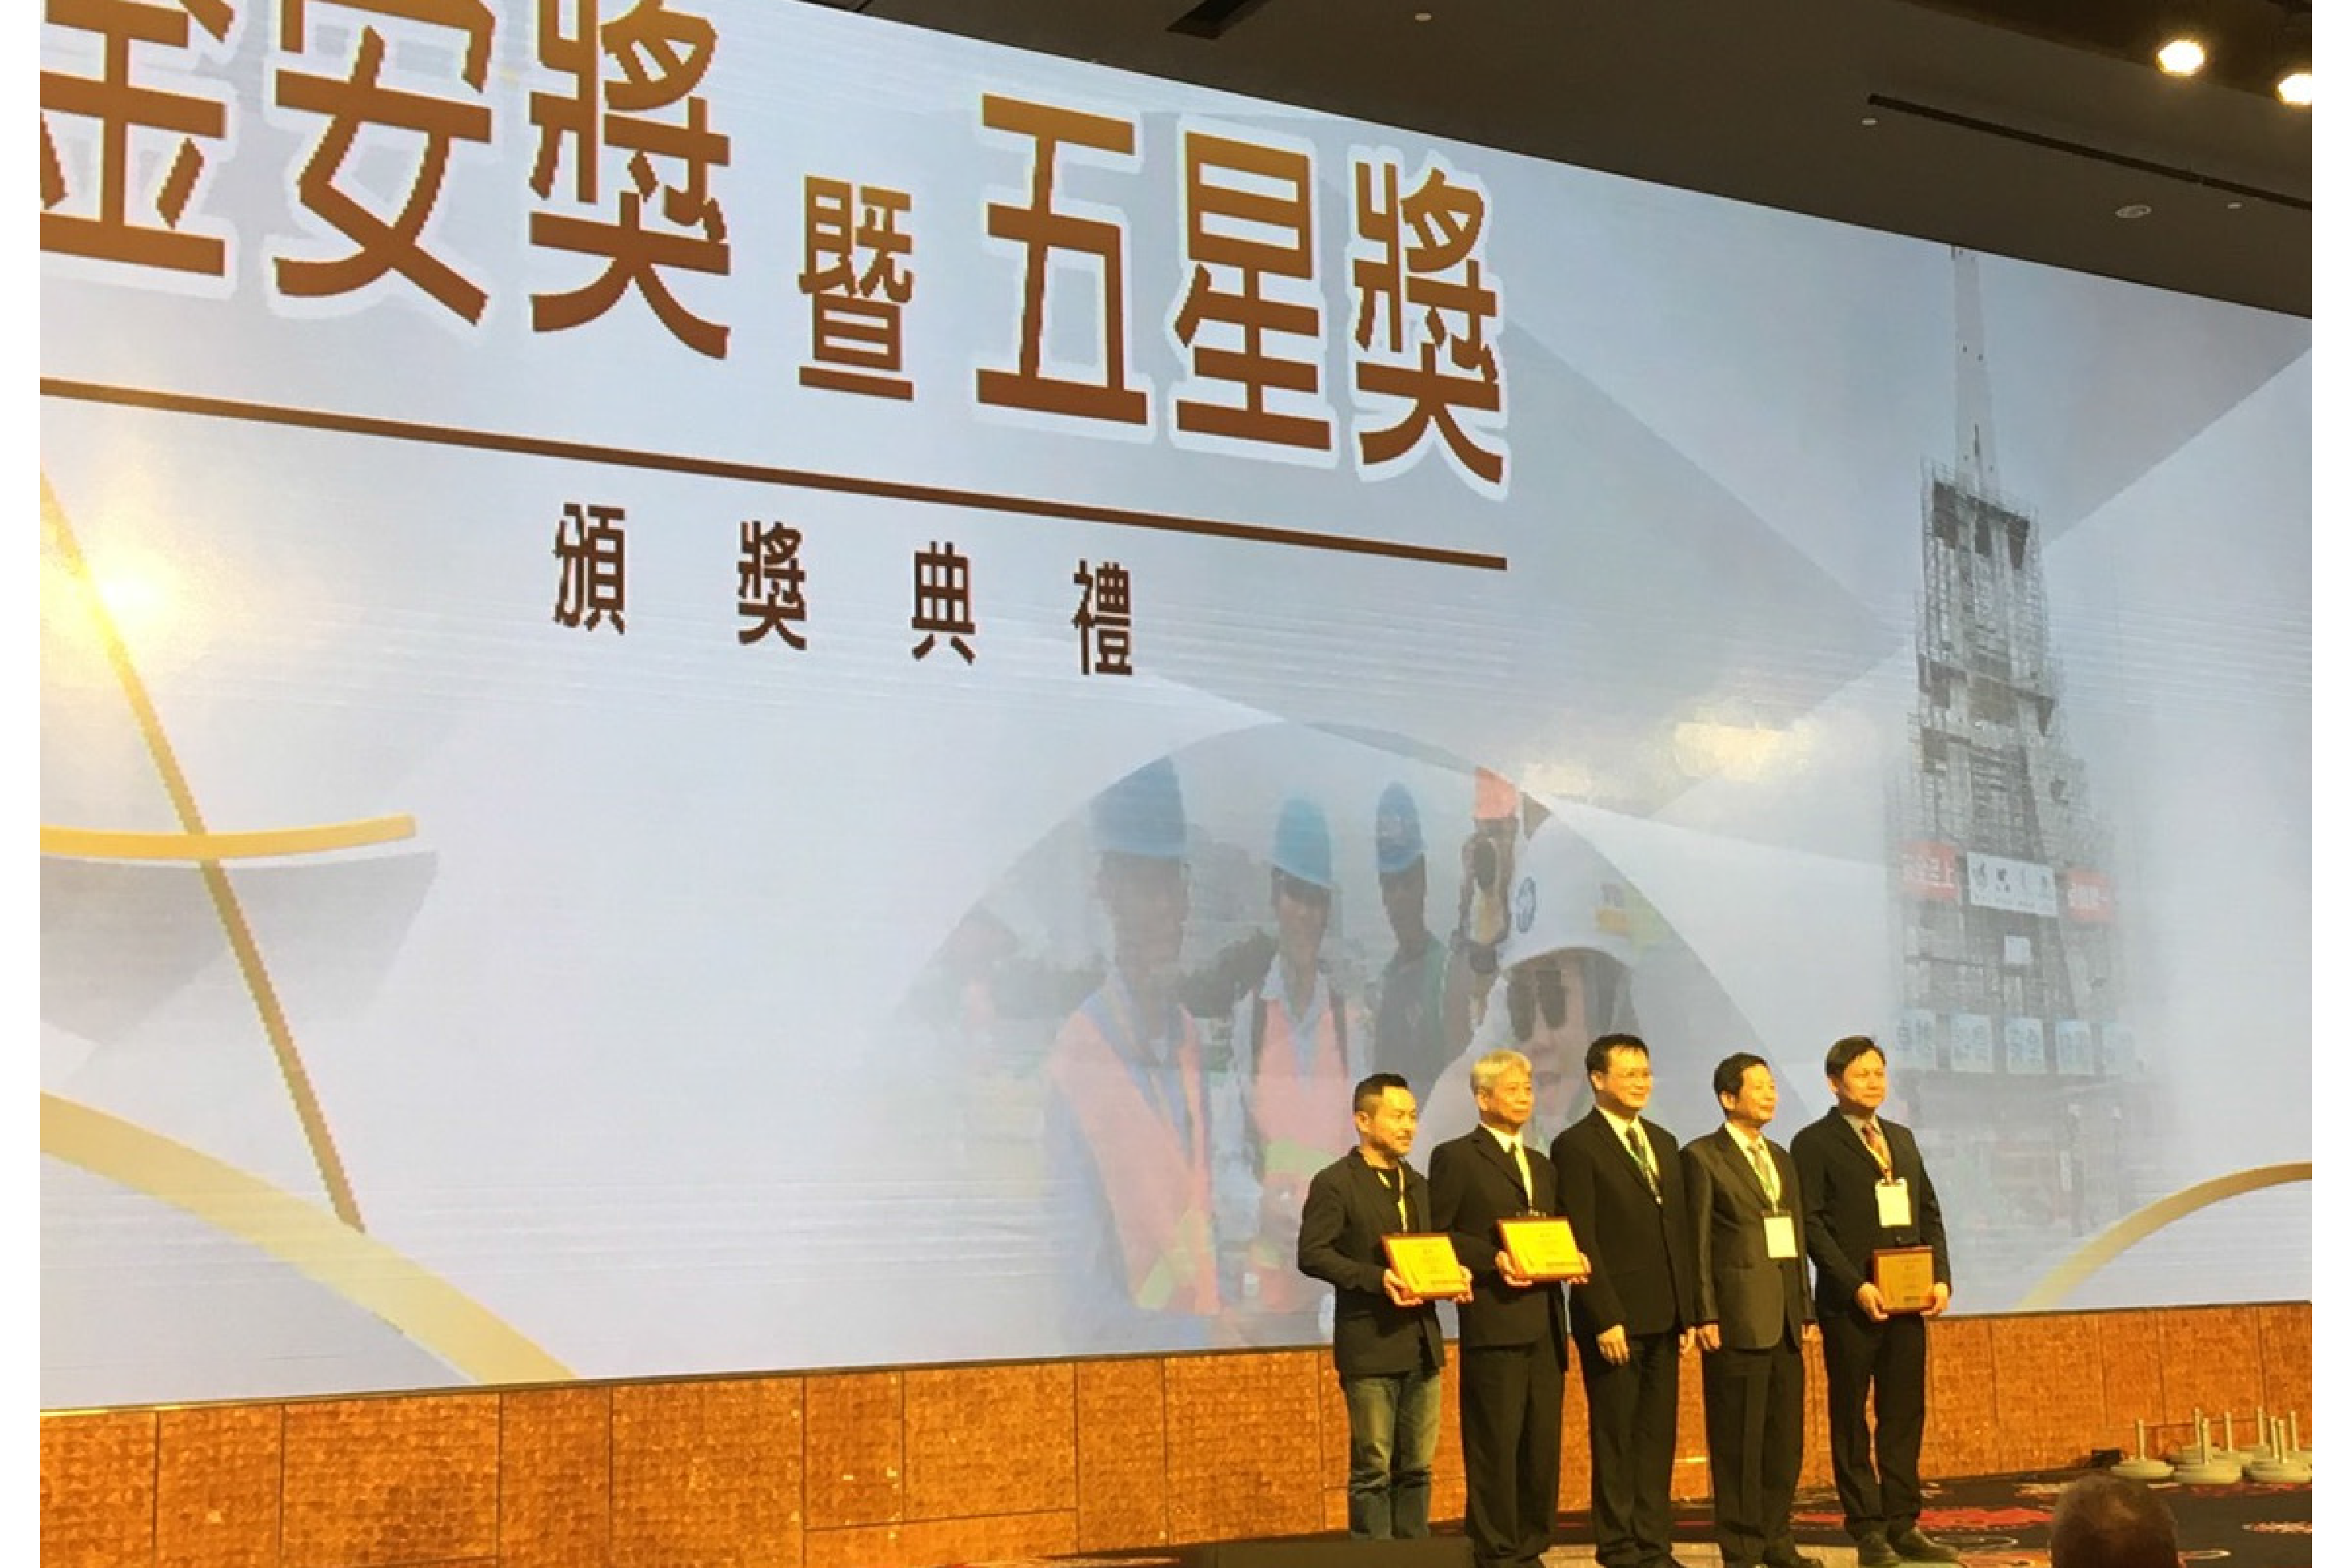 The Golden Safety Award of the 2020 National Occupational Safety and Health Award